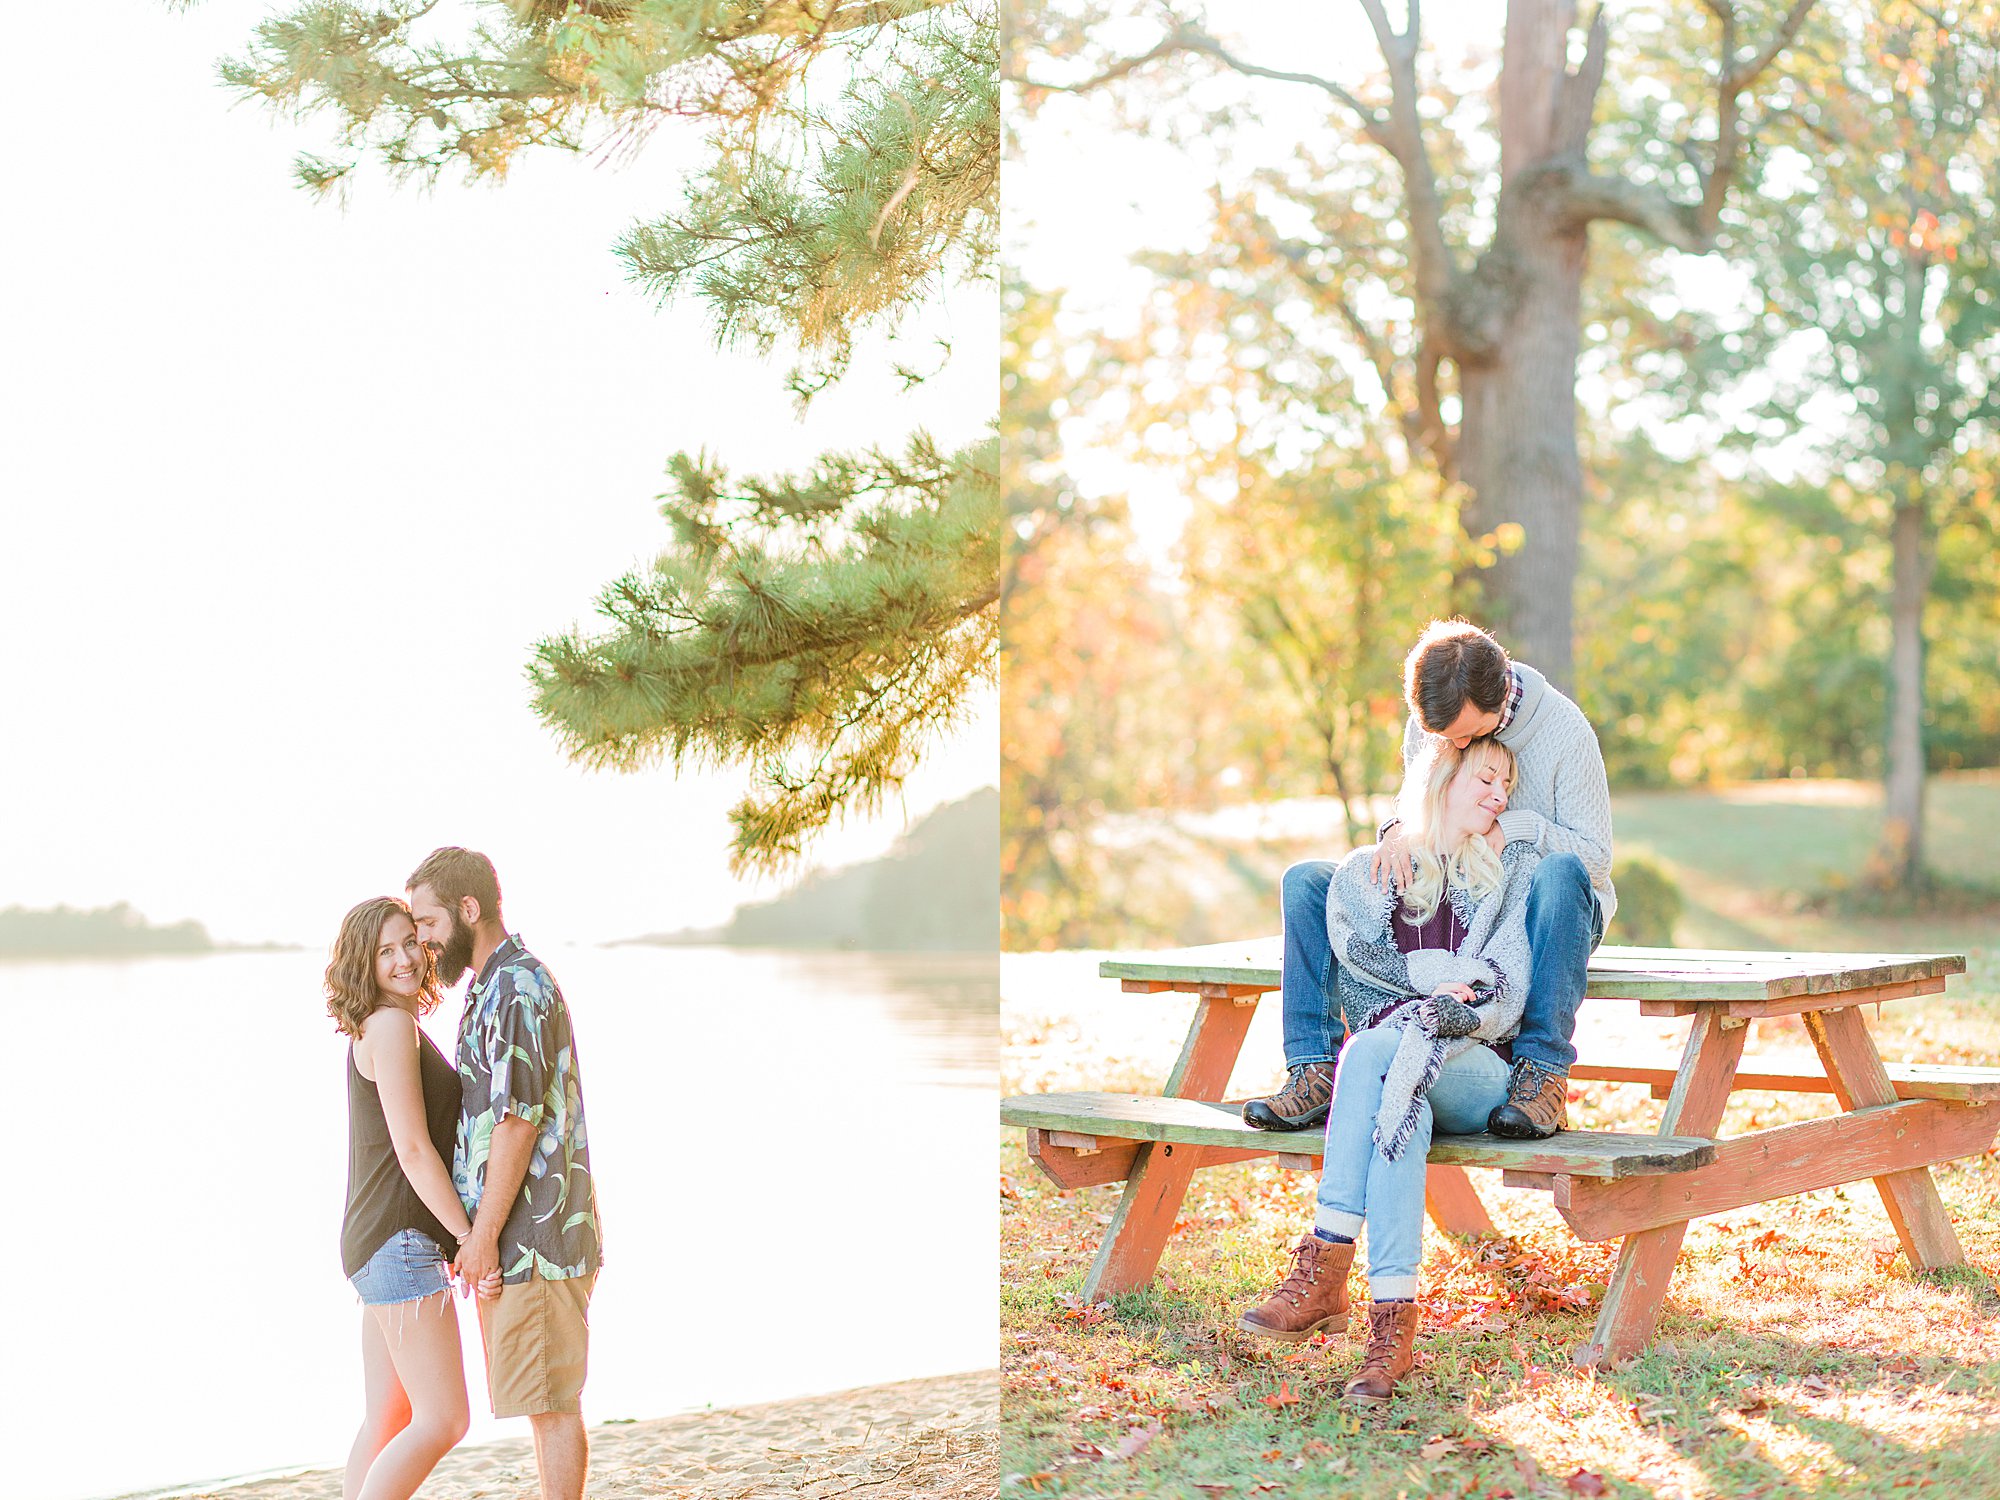 Sunny day engagement photos.